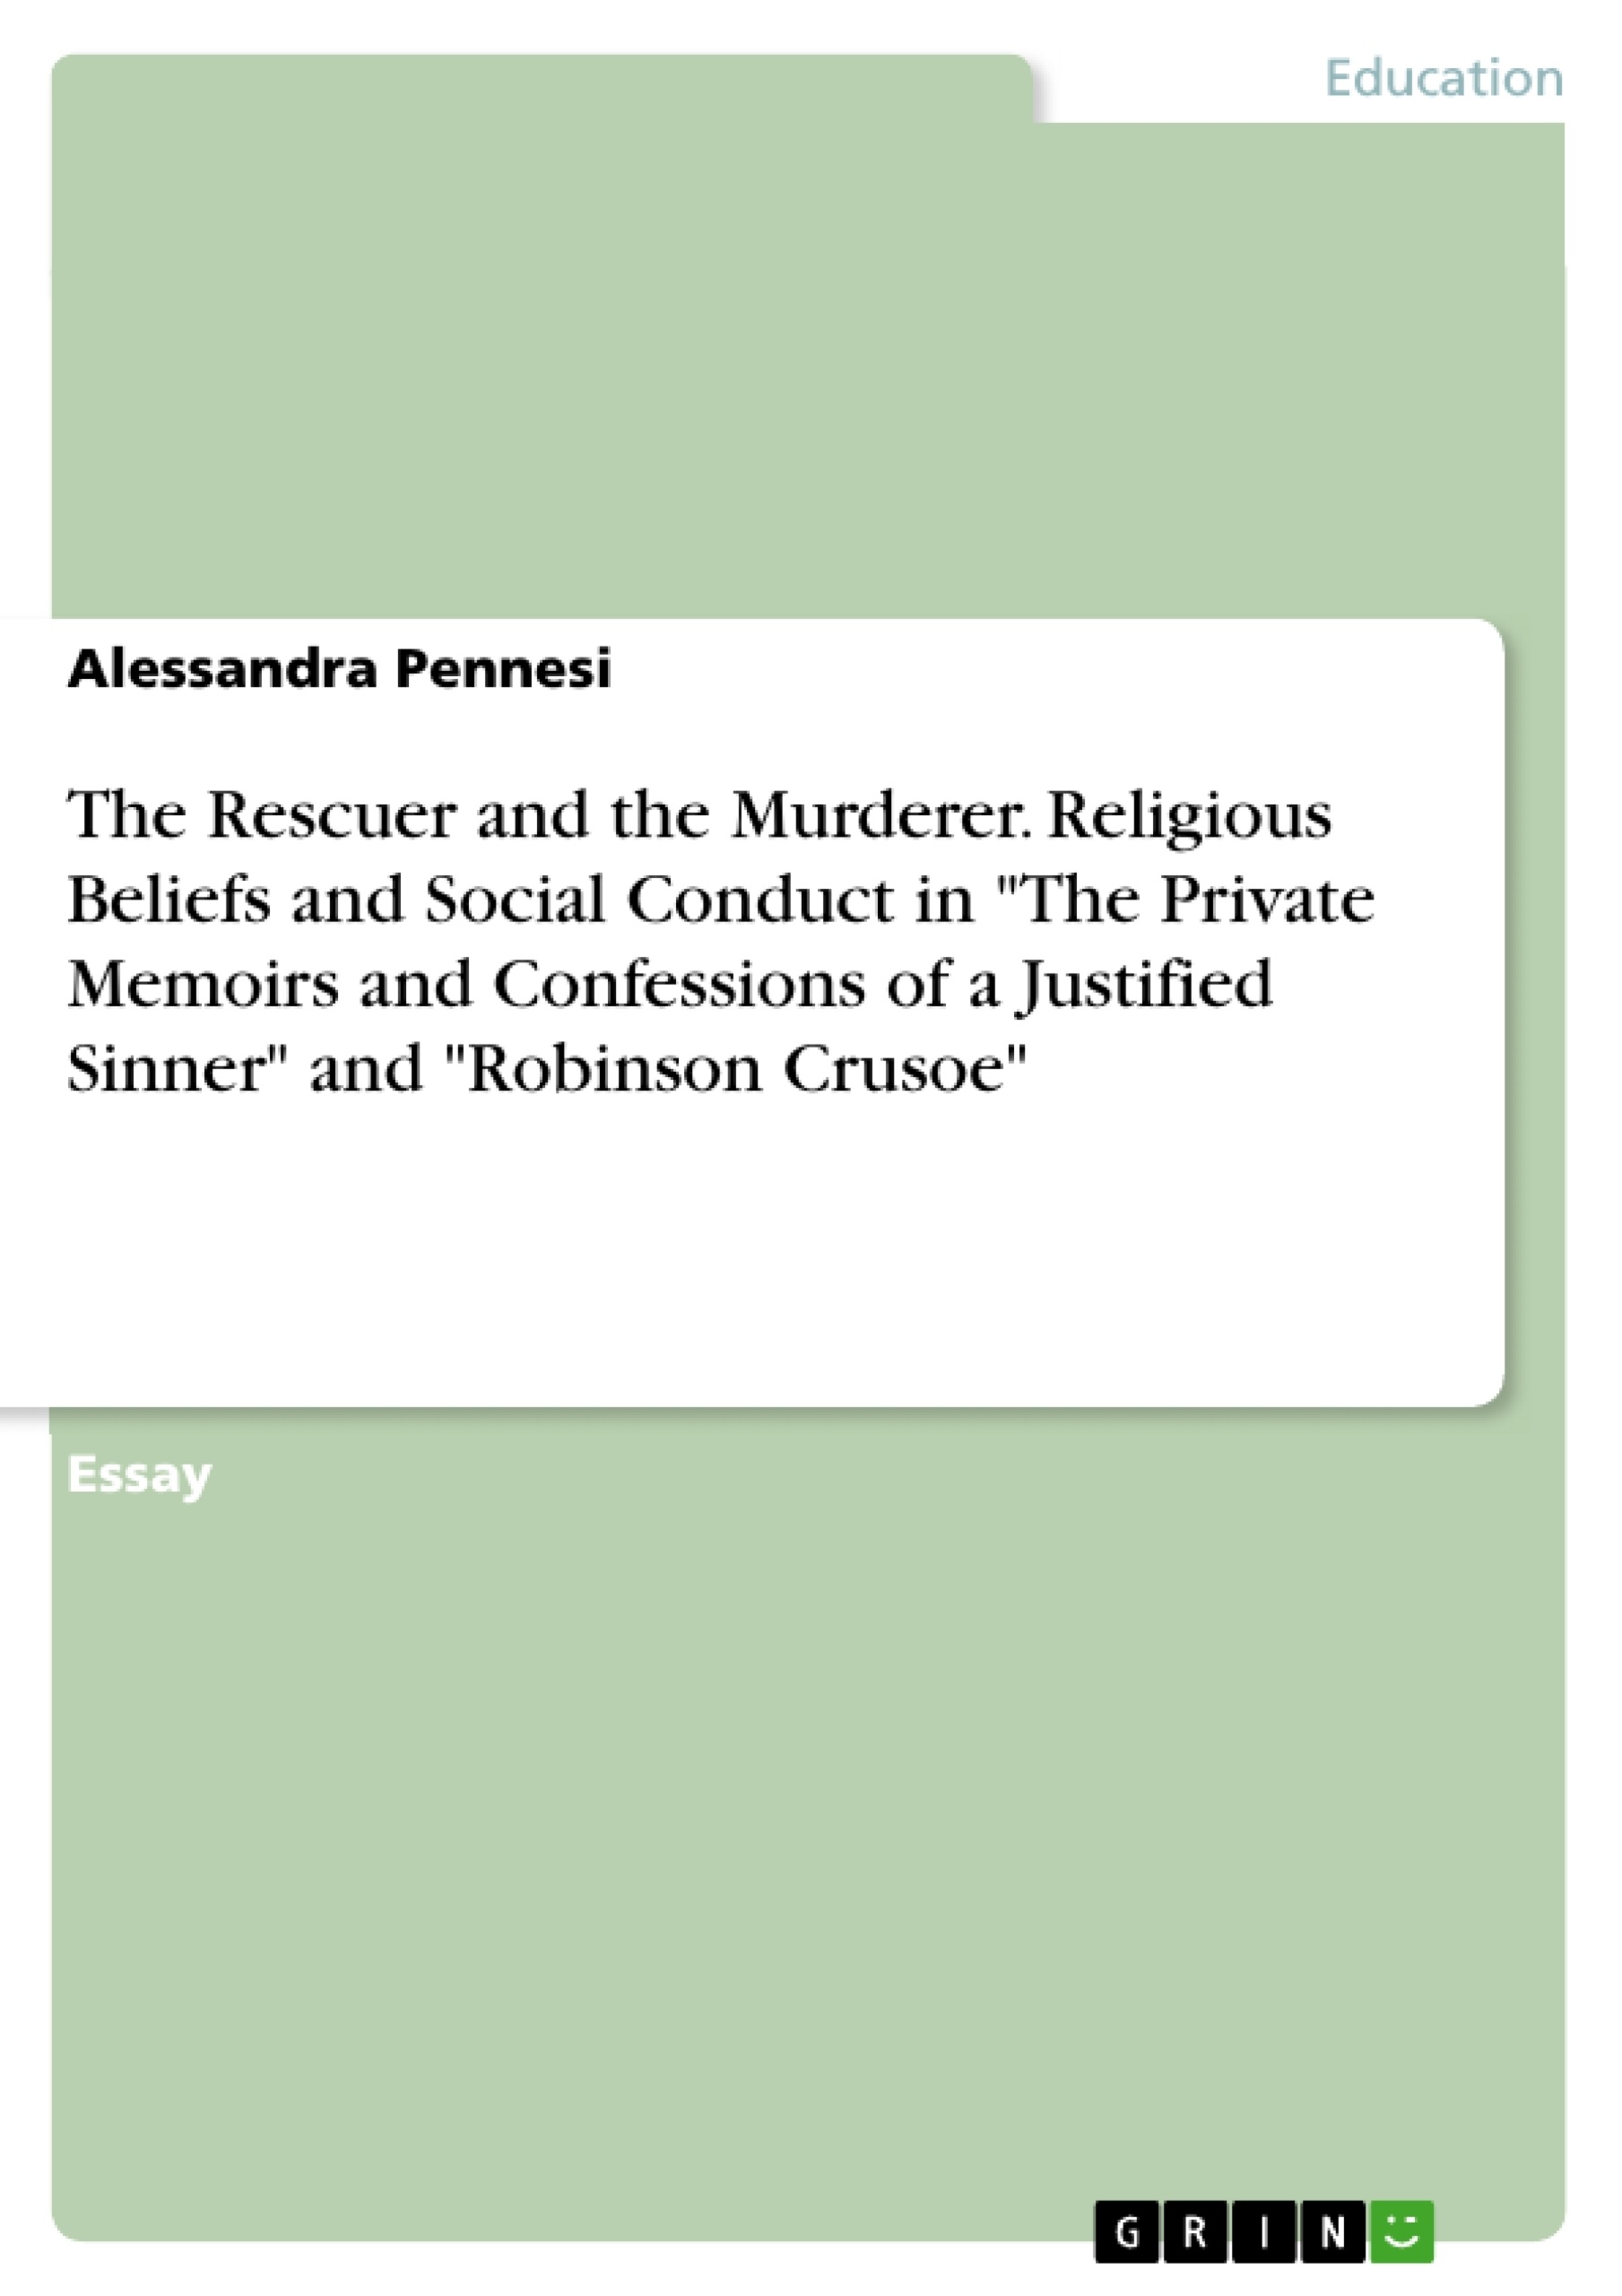 Título: The Rescuer and the Murderer. Religious Beliefs and Social Conduct in "The Private Memoirs and Confessions of a Justified Sinner" and "Robinson Crusoe"